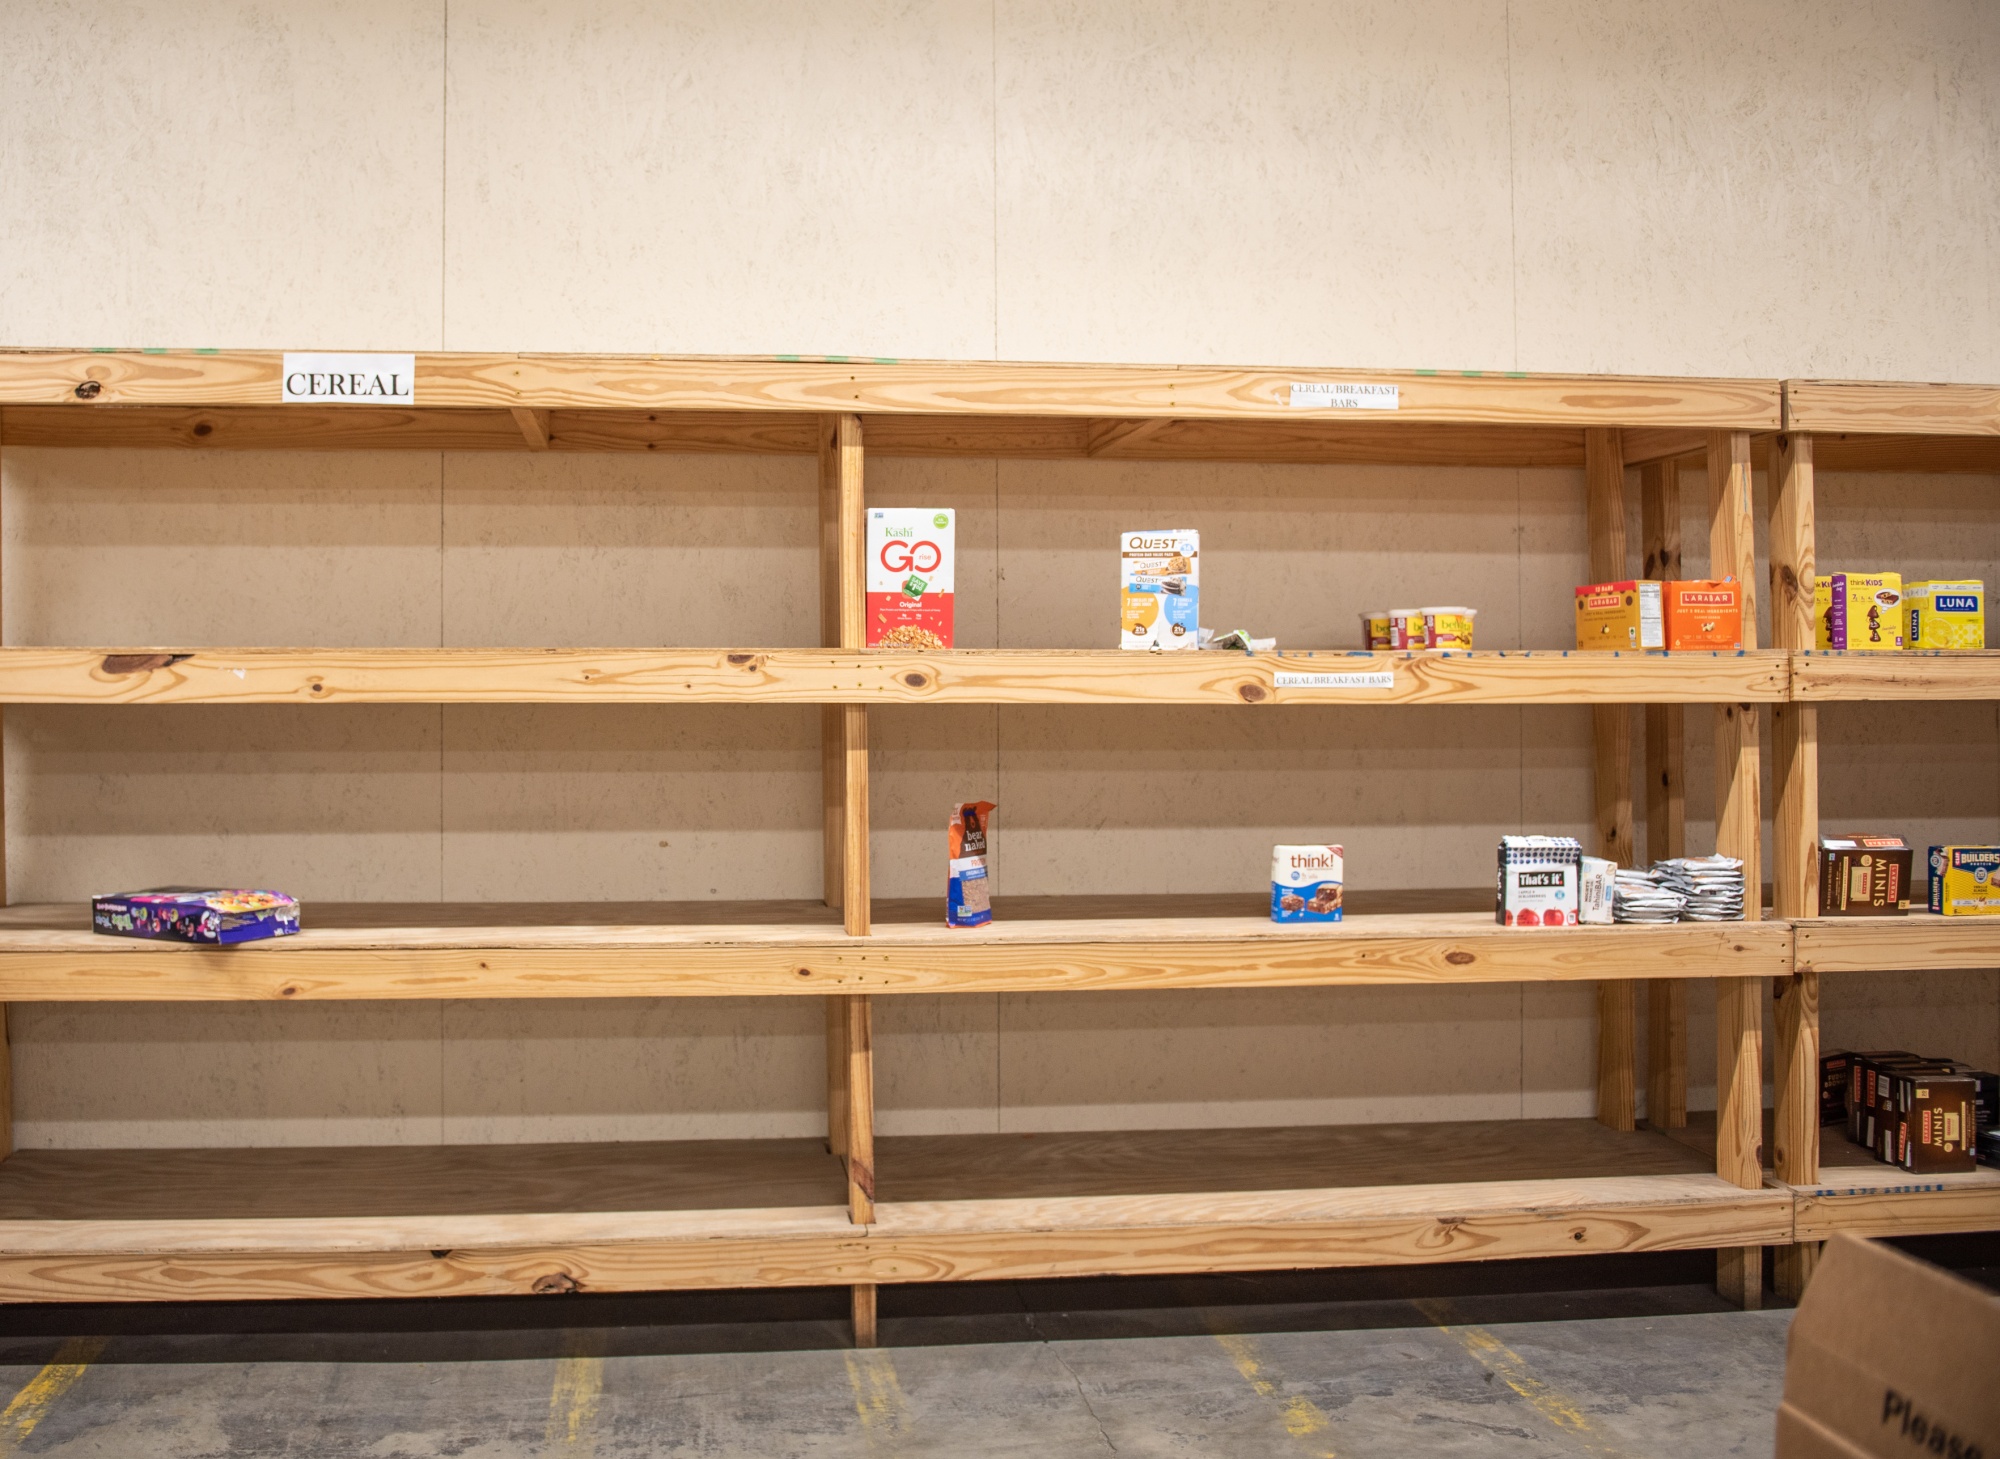 Food banks and pantries across the U.S. are suffering with soaring operating costs.